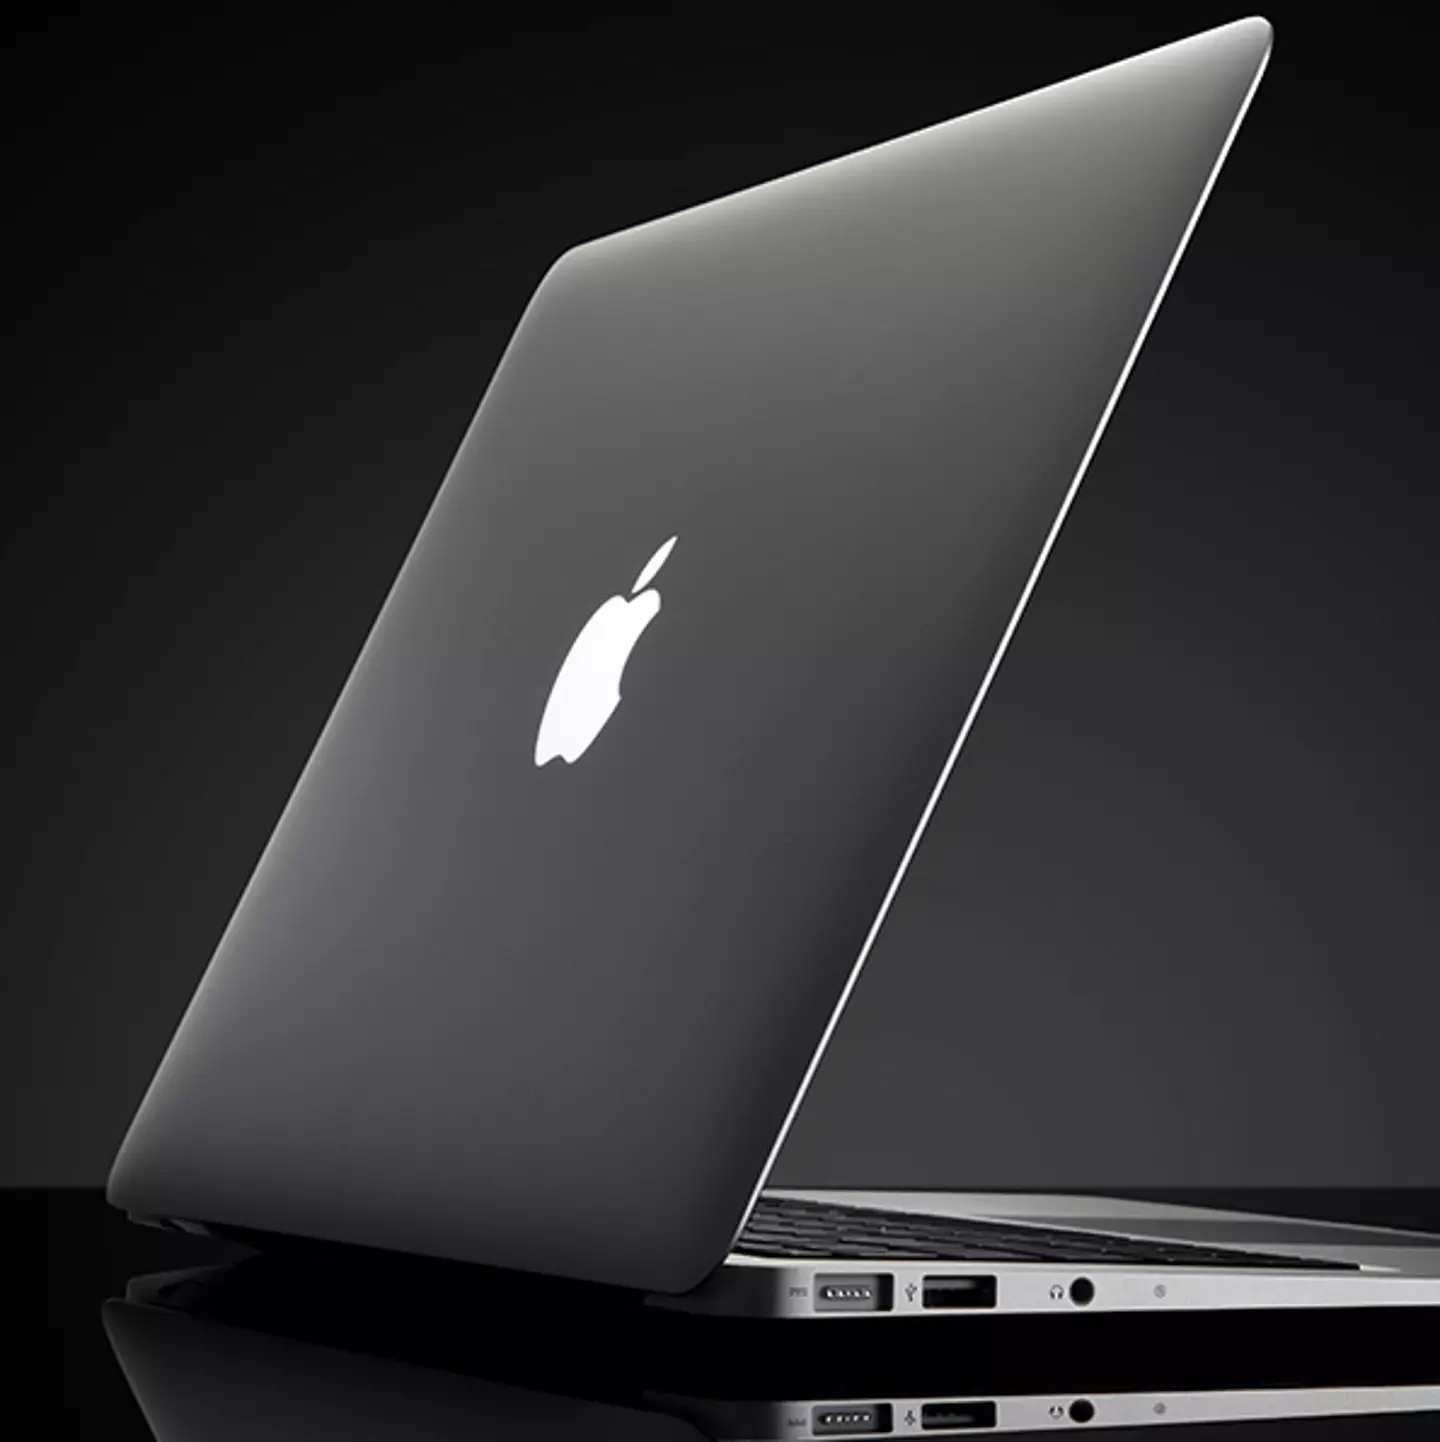 Reason why Apple got rid of 'iconic' feature on its MacBooks